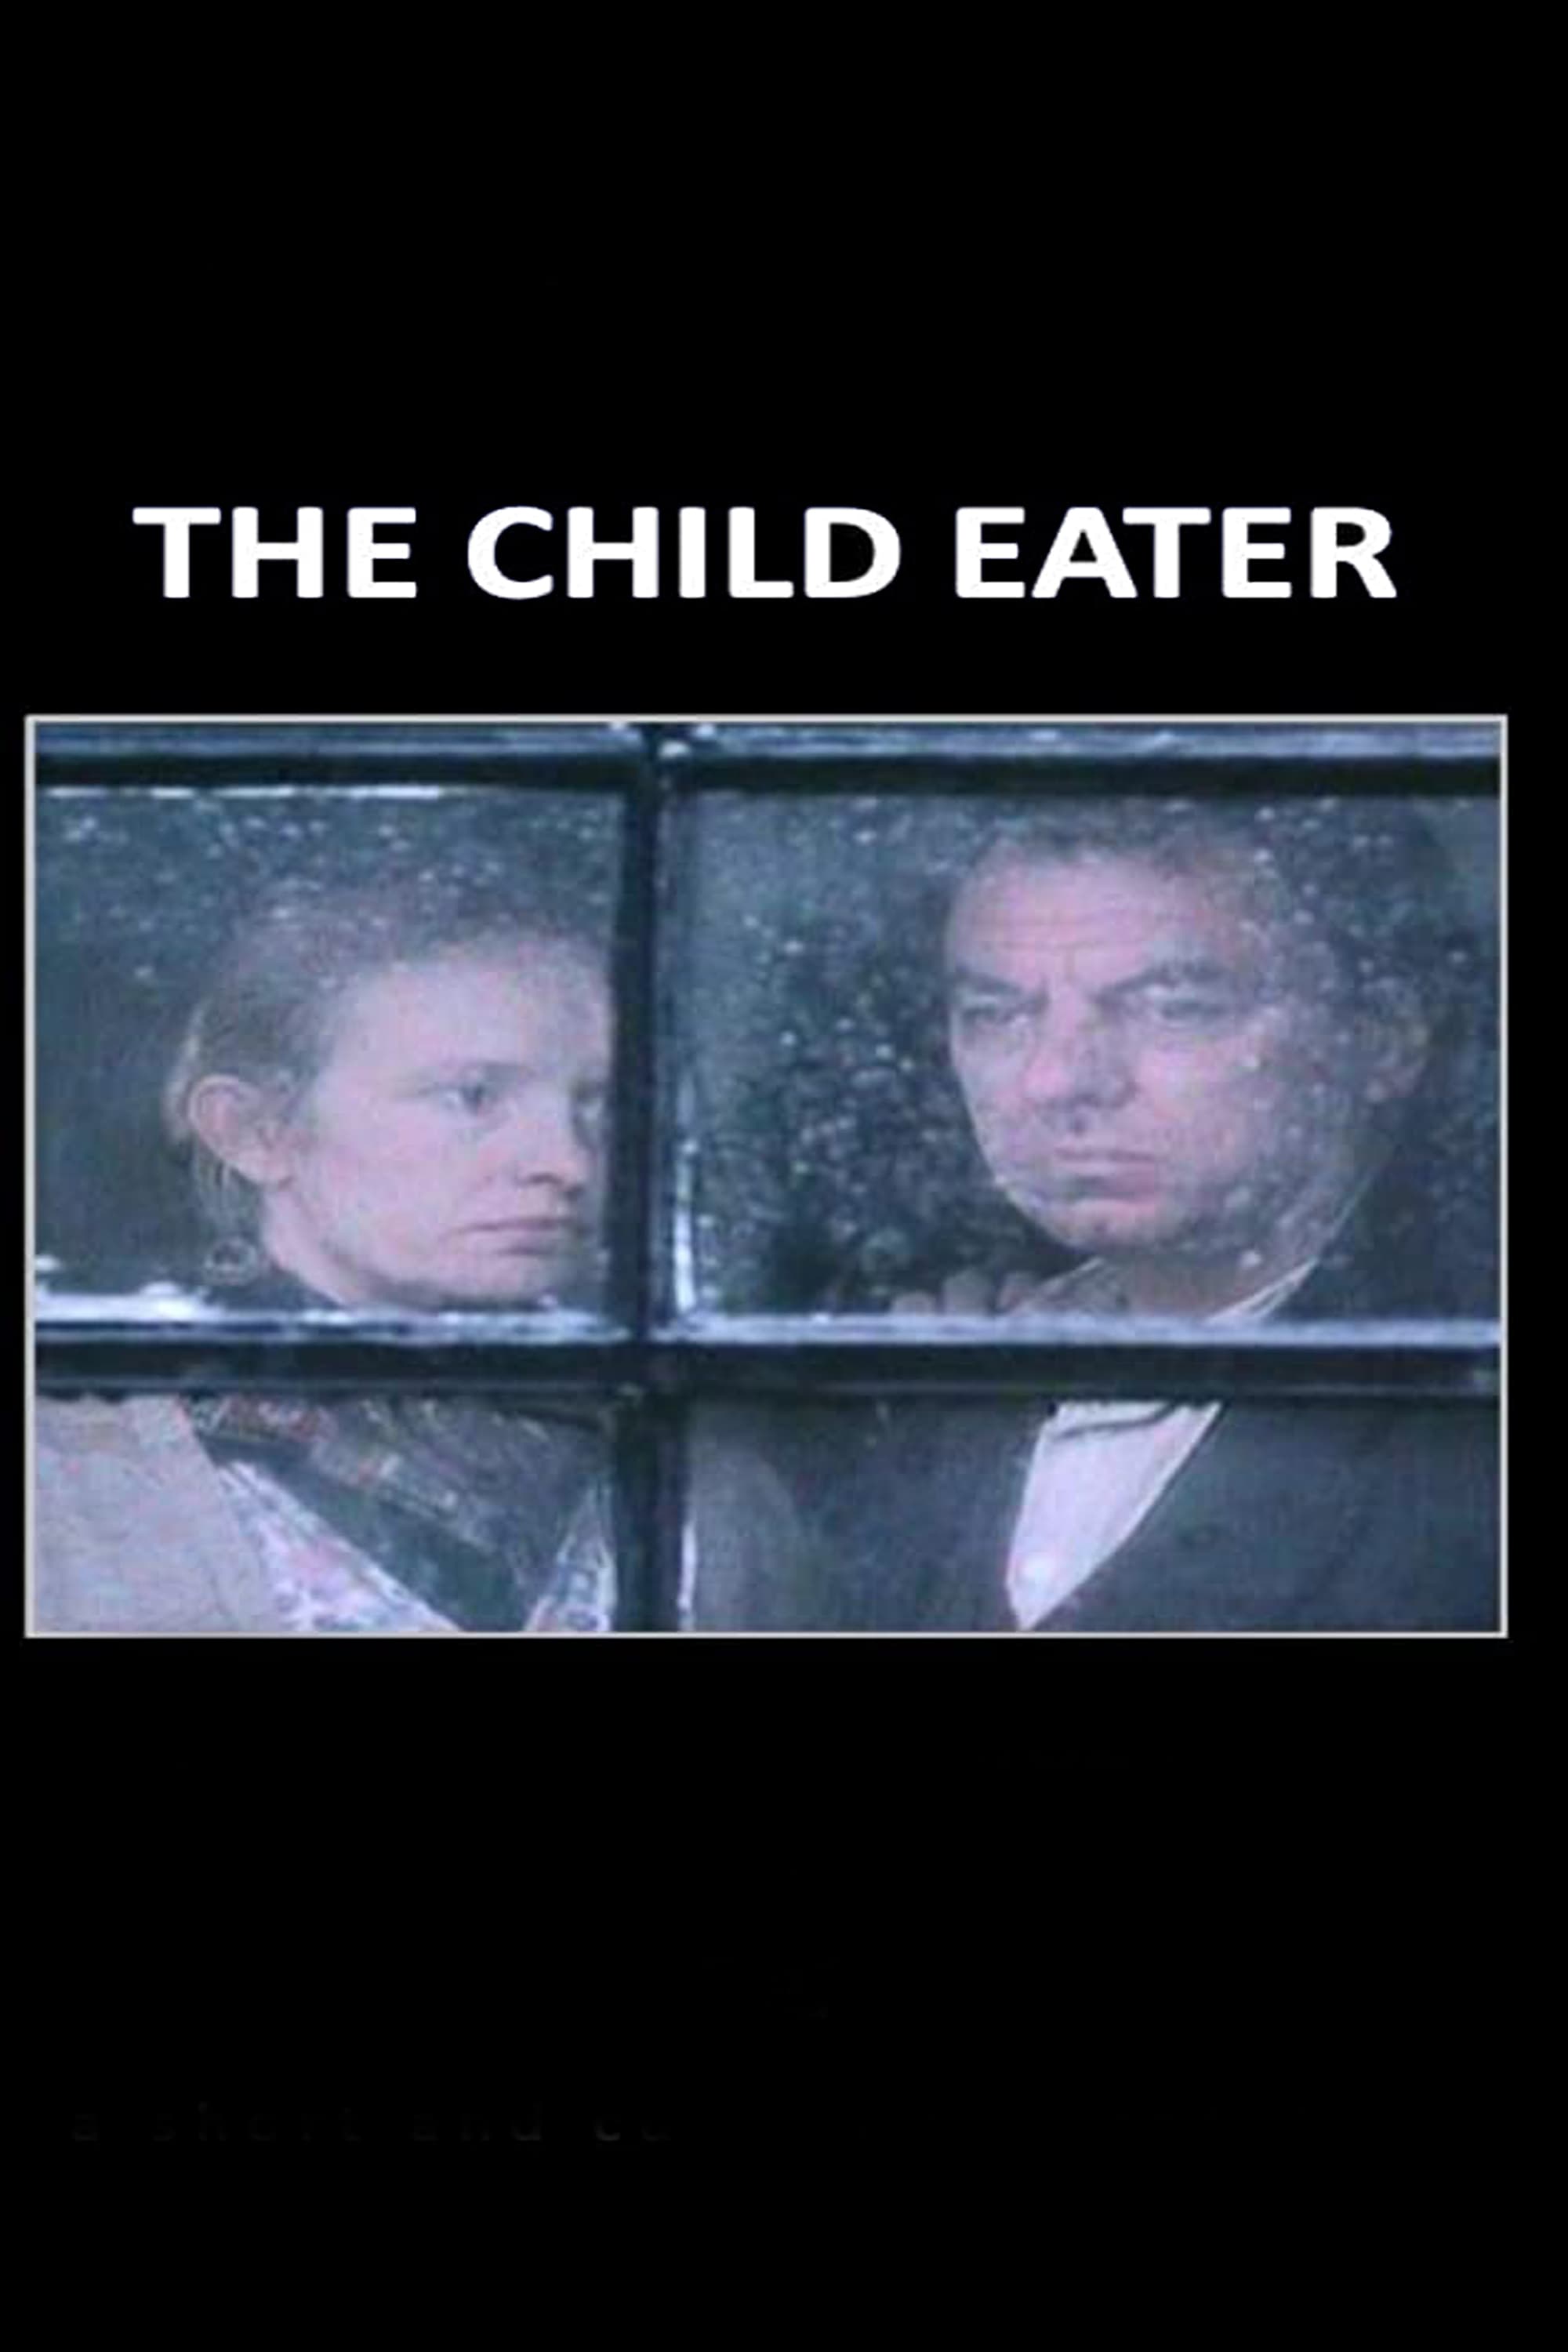 The Childeater (1989)